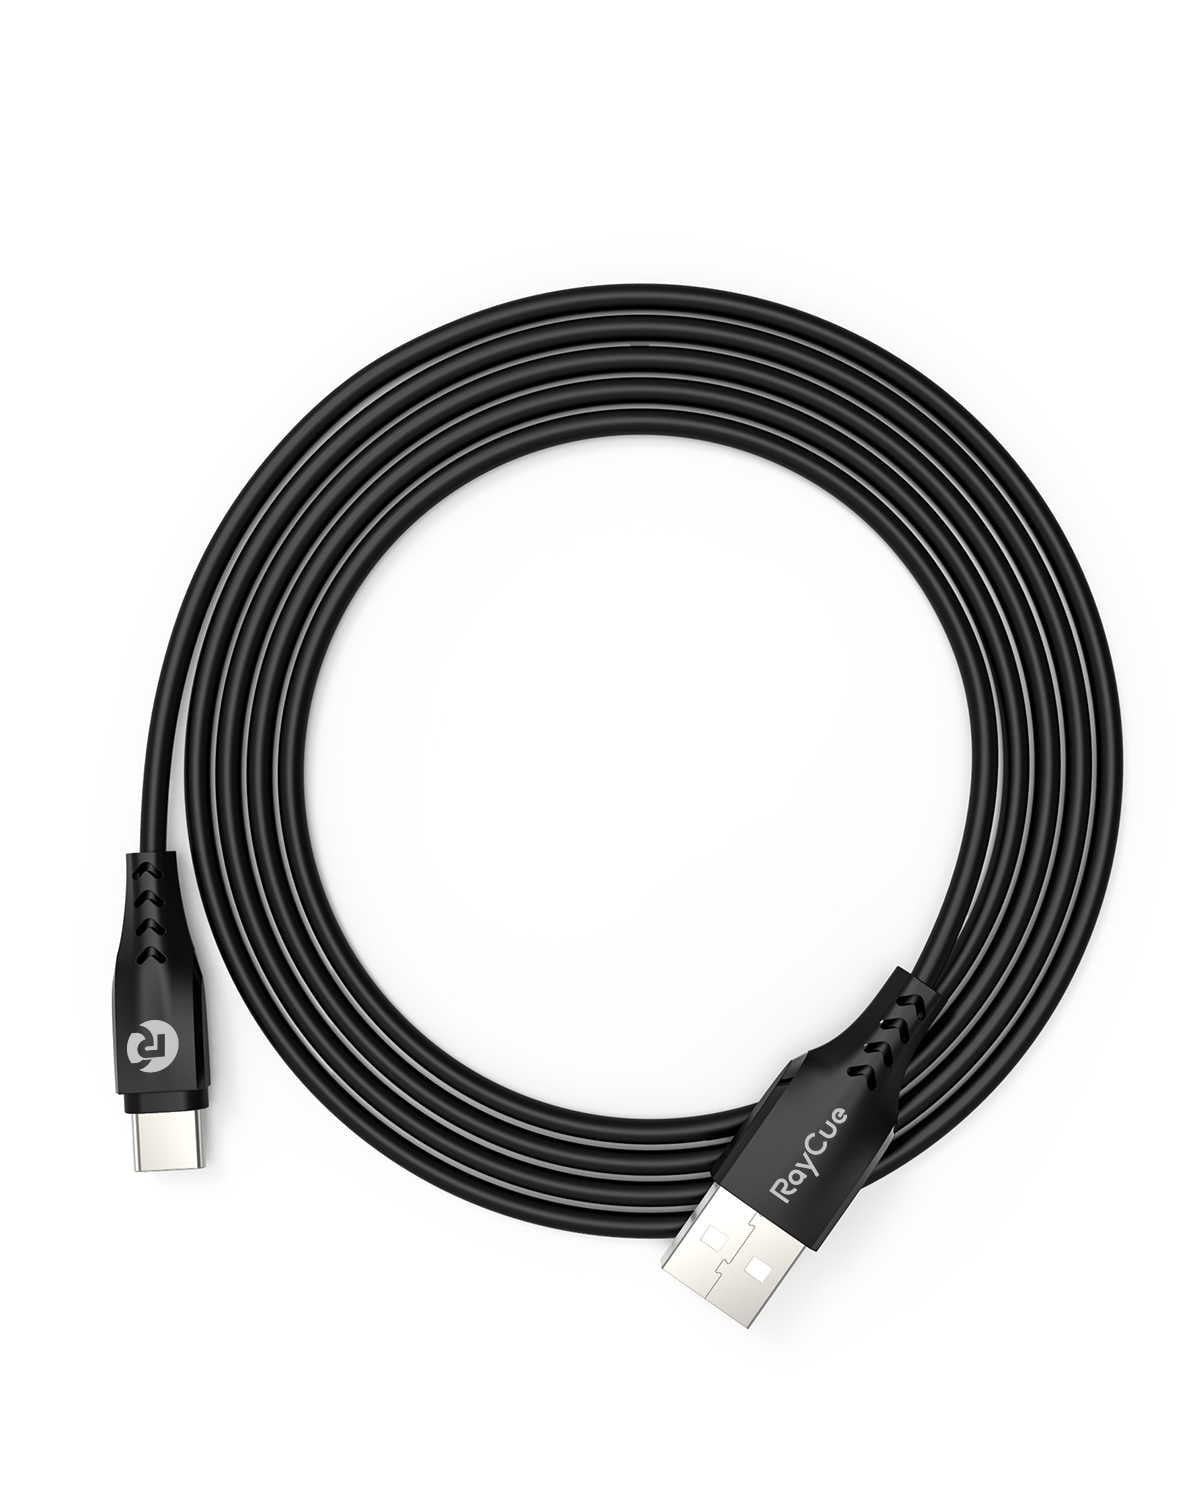 RayCue BlitzLink Flexo 1.2M PVC USB-A to C Cable for Smartphones and Tablets